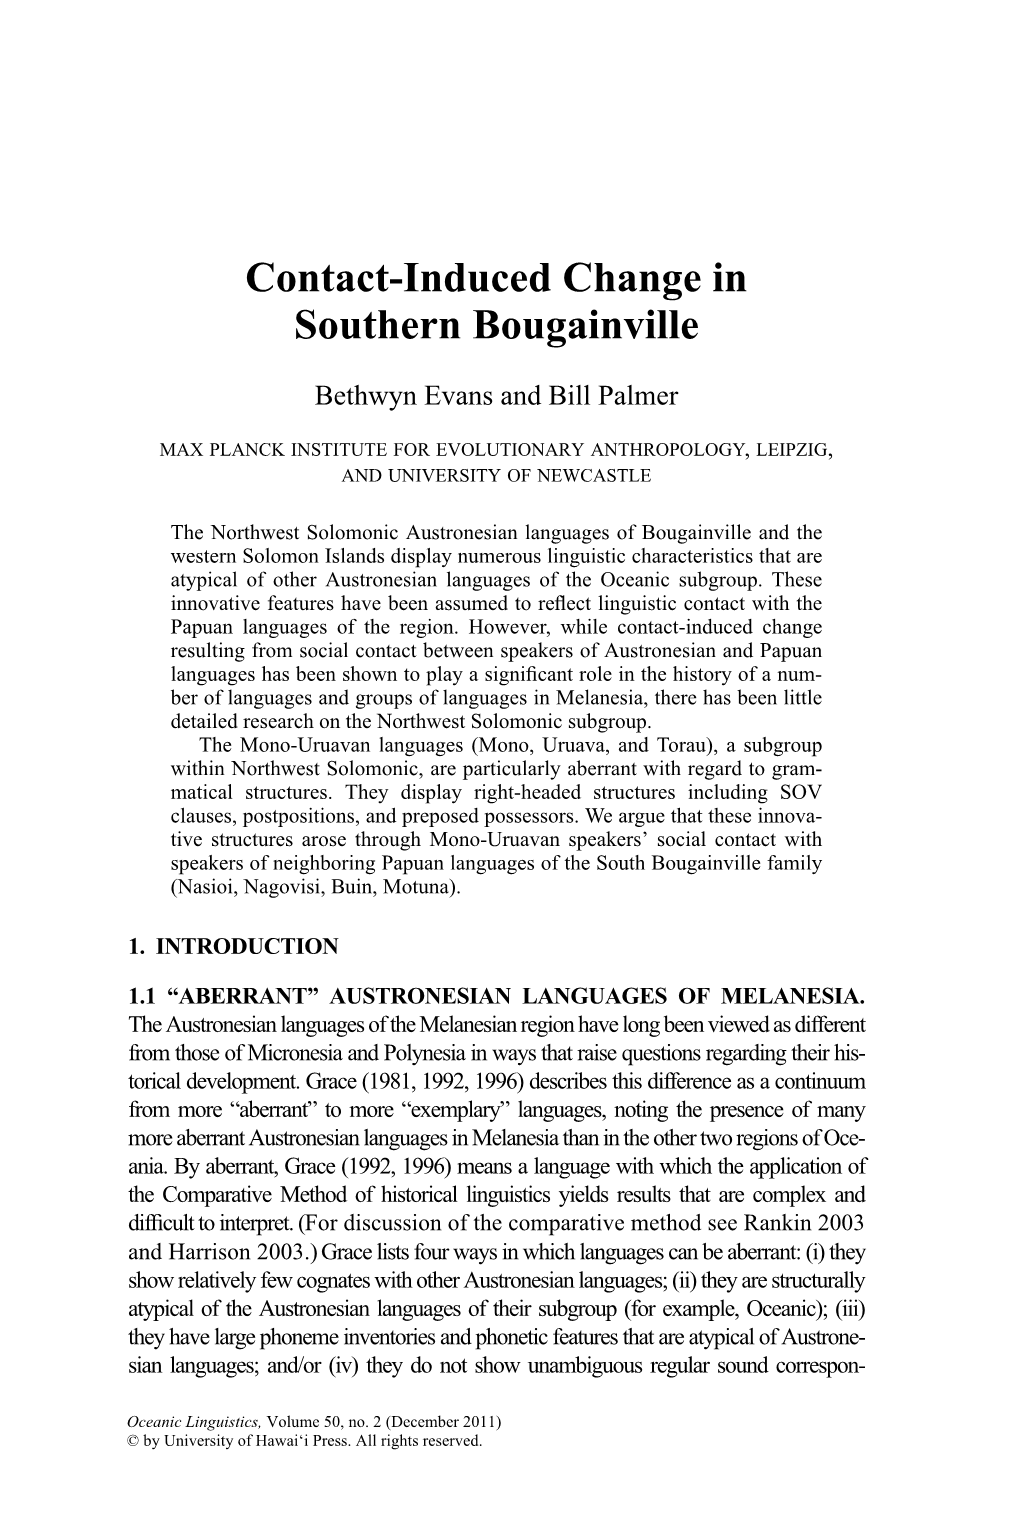 Contact-Induced Change in Southern Bougainville